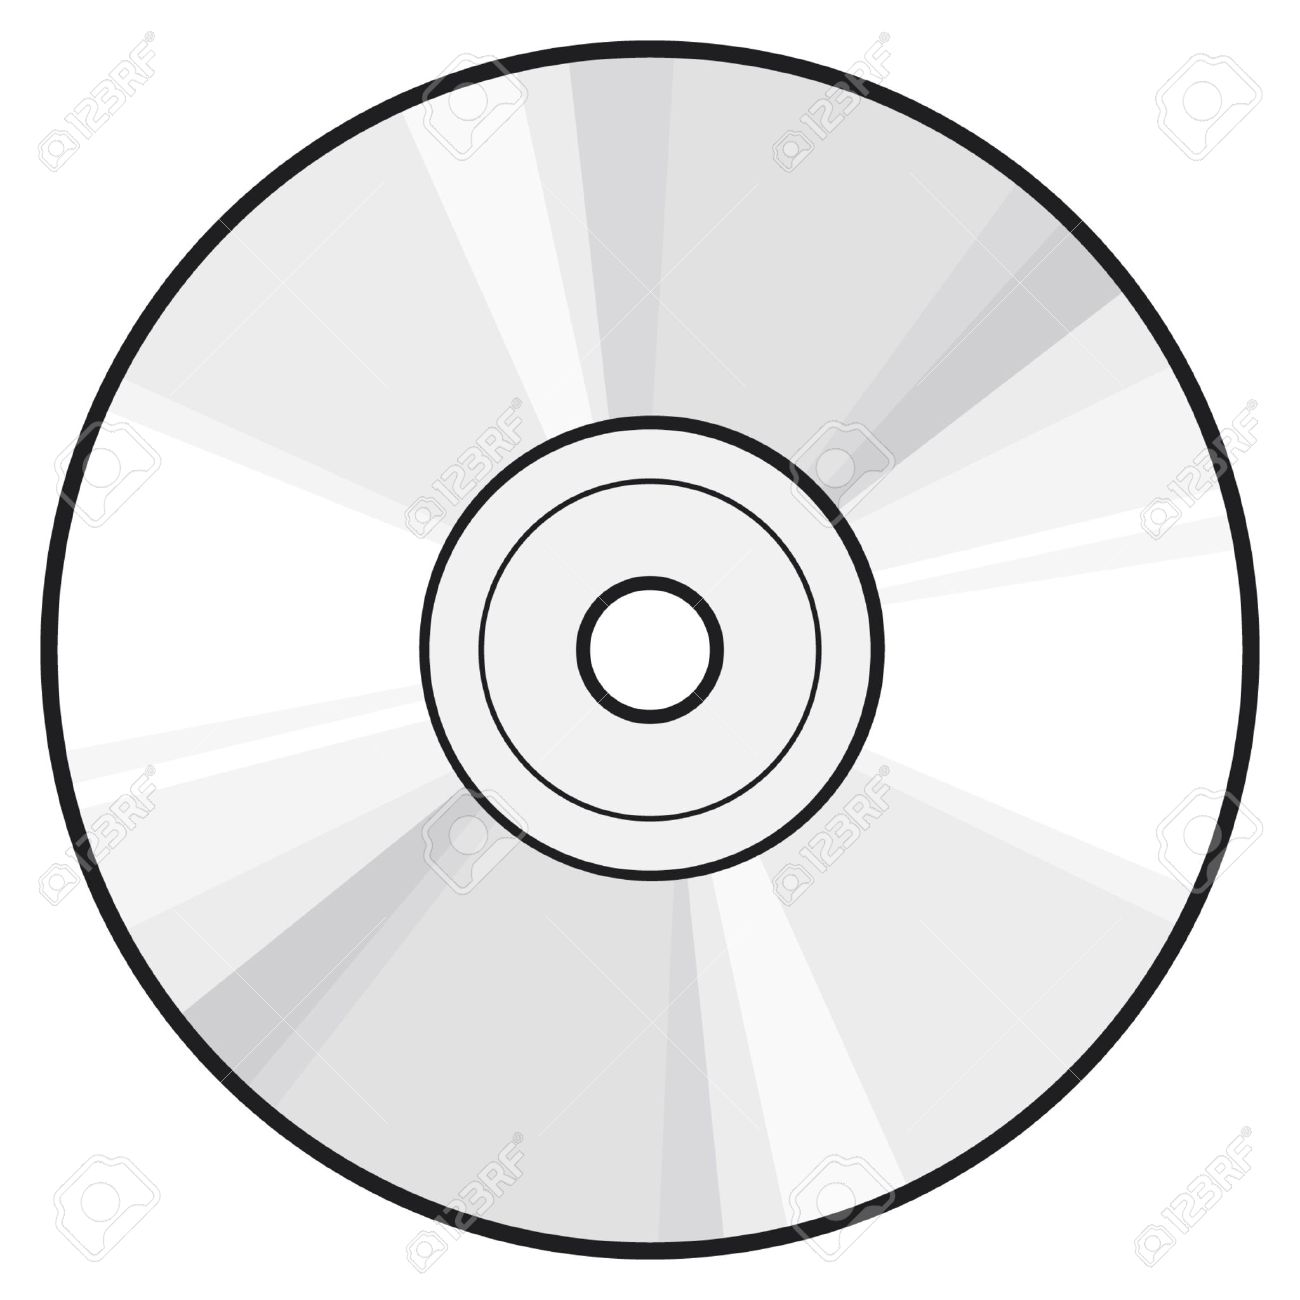 cd clipart compact disk